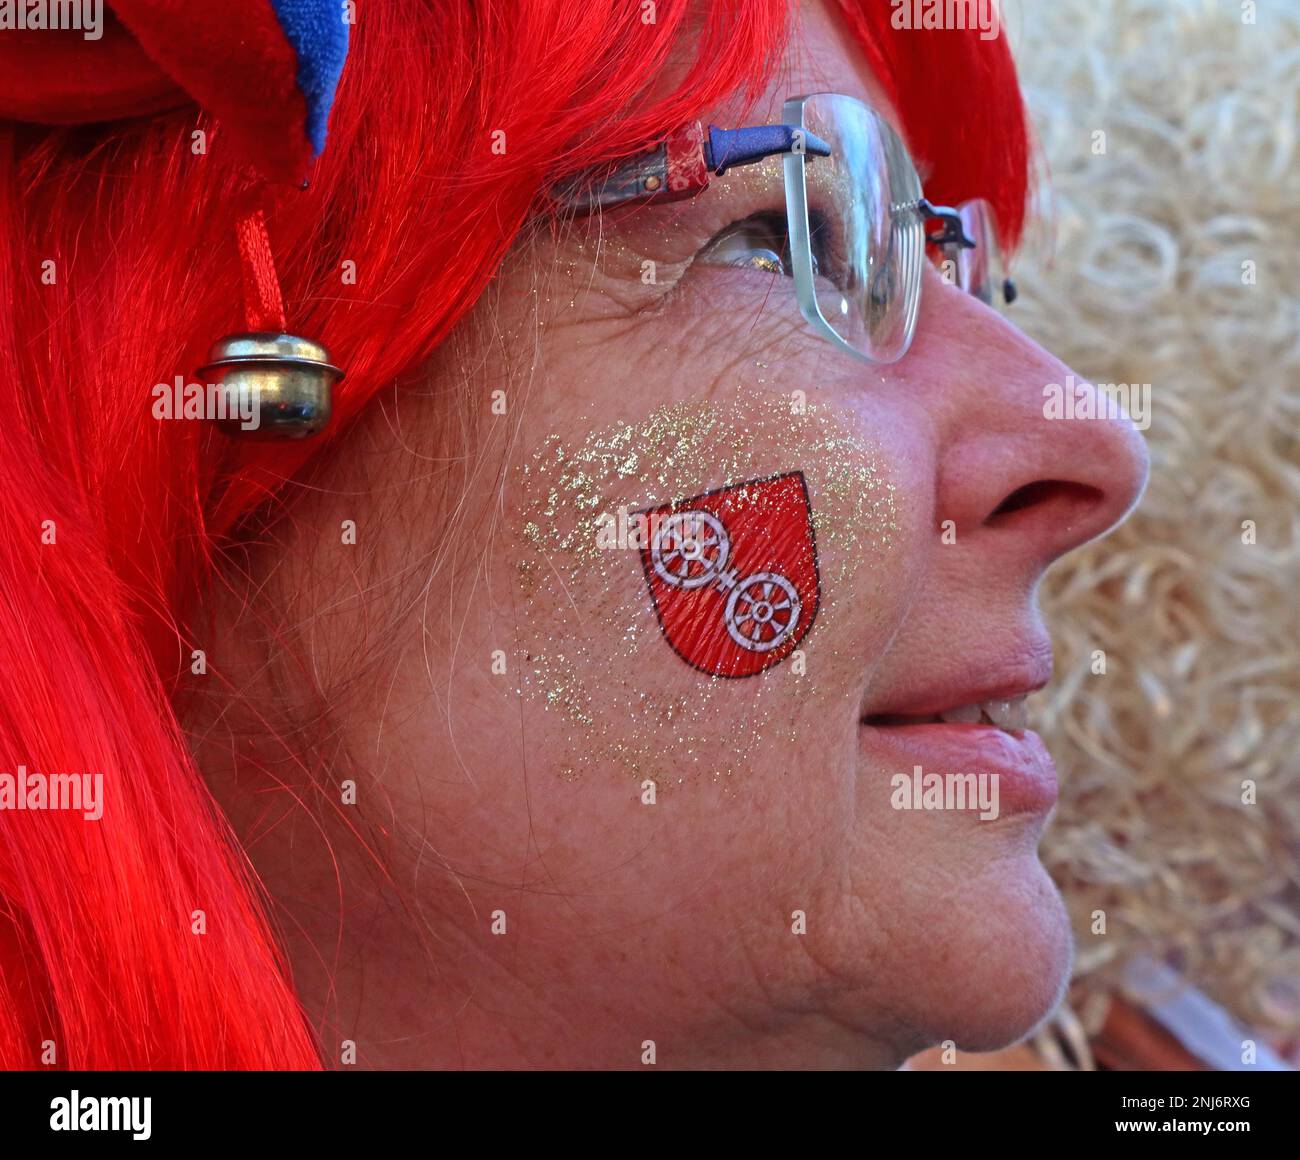 Enjoying the Mainz Fastnacht, Shrove Monday, woman in a red wig with temporary tattoo in red of the city coat of arms, Feb 2023 Stock Photo